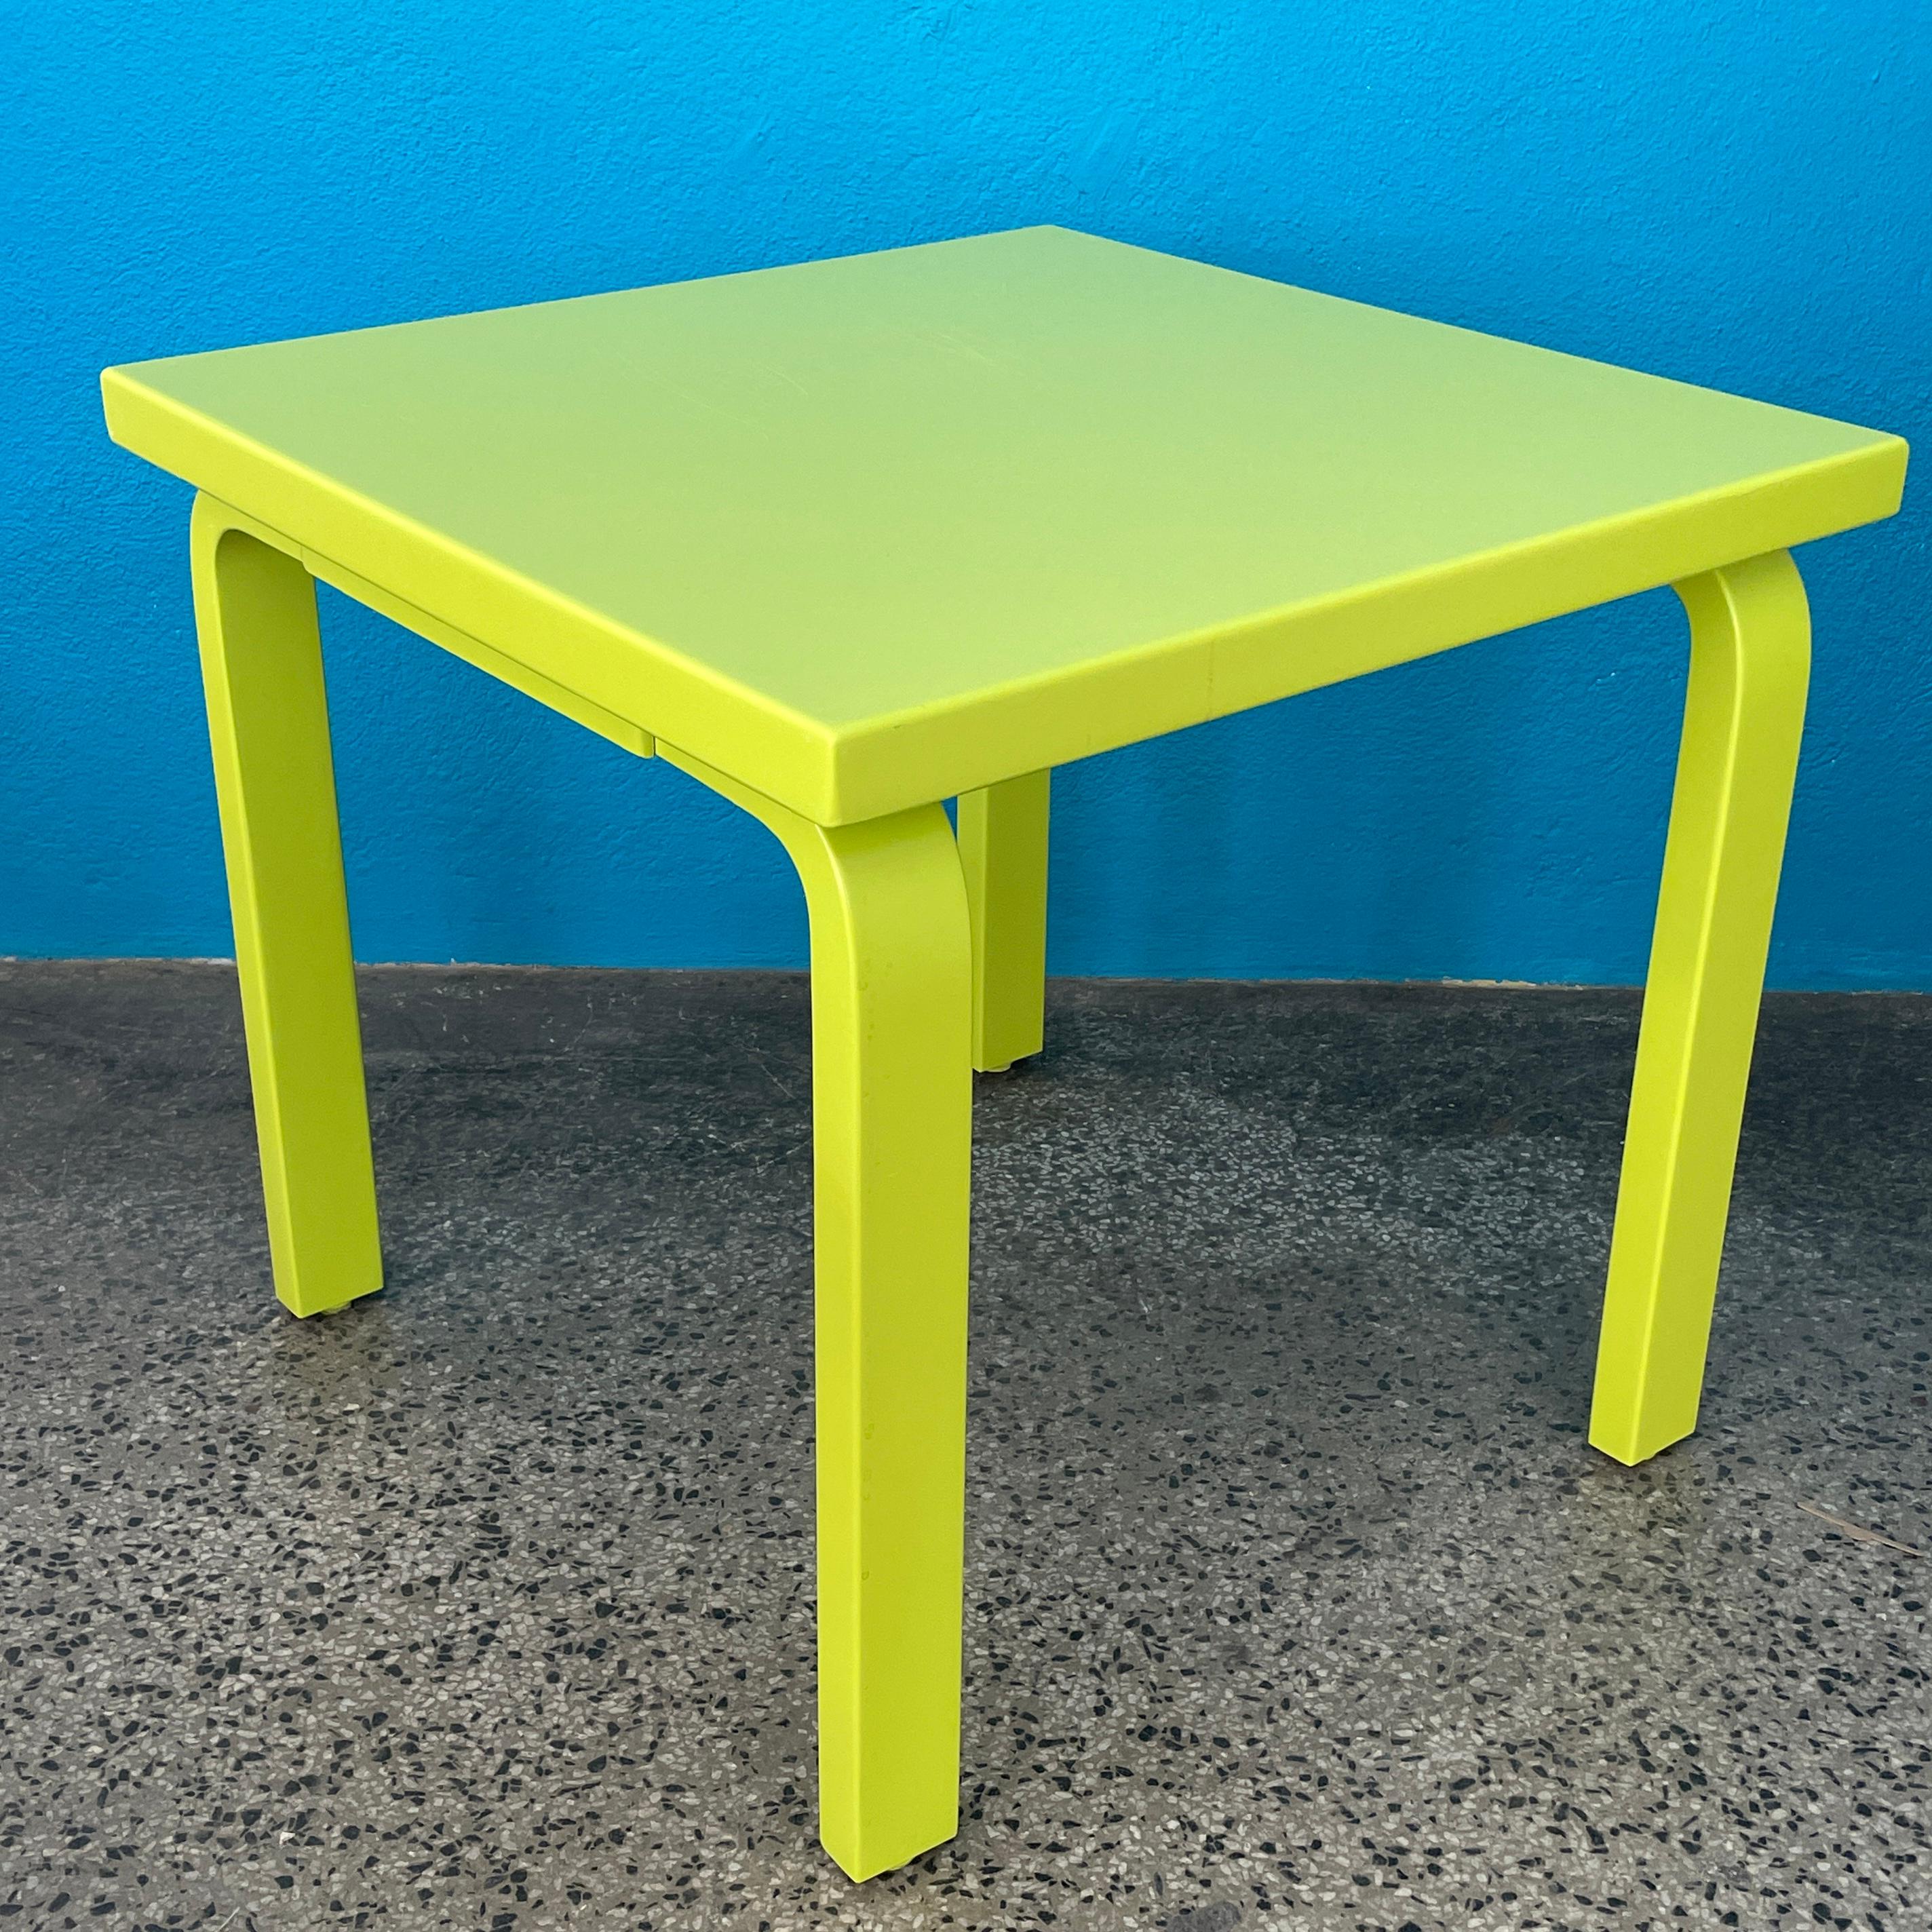 Spectacularly colored little table By Alvar Aalto For Artek Finland. 

Iconic L-leg Design. Re-Painted by a professional at some point. No original color.

Dimensions:
Height 54cm
Lwnght and Width 60cm

Suitable for many uses like Sofa Table, Kids